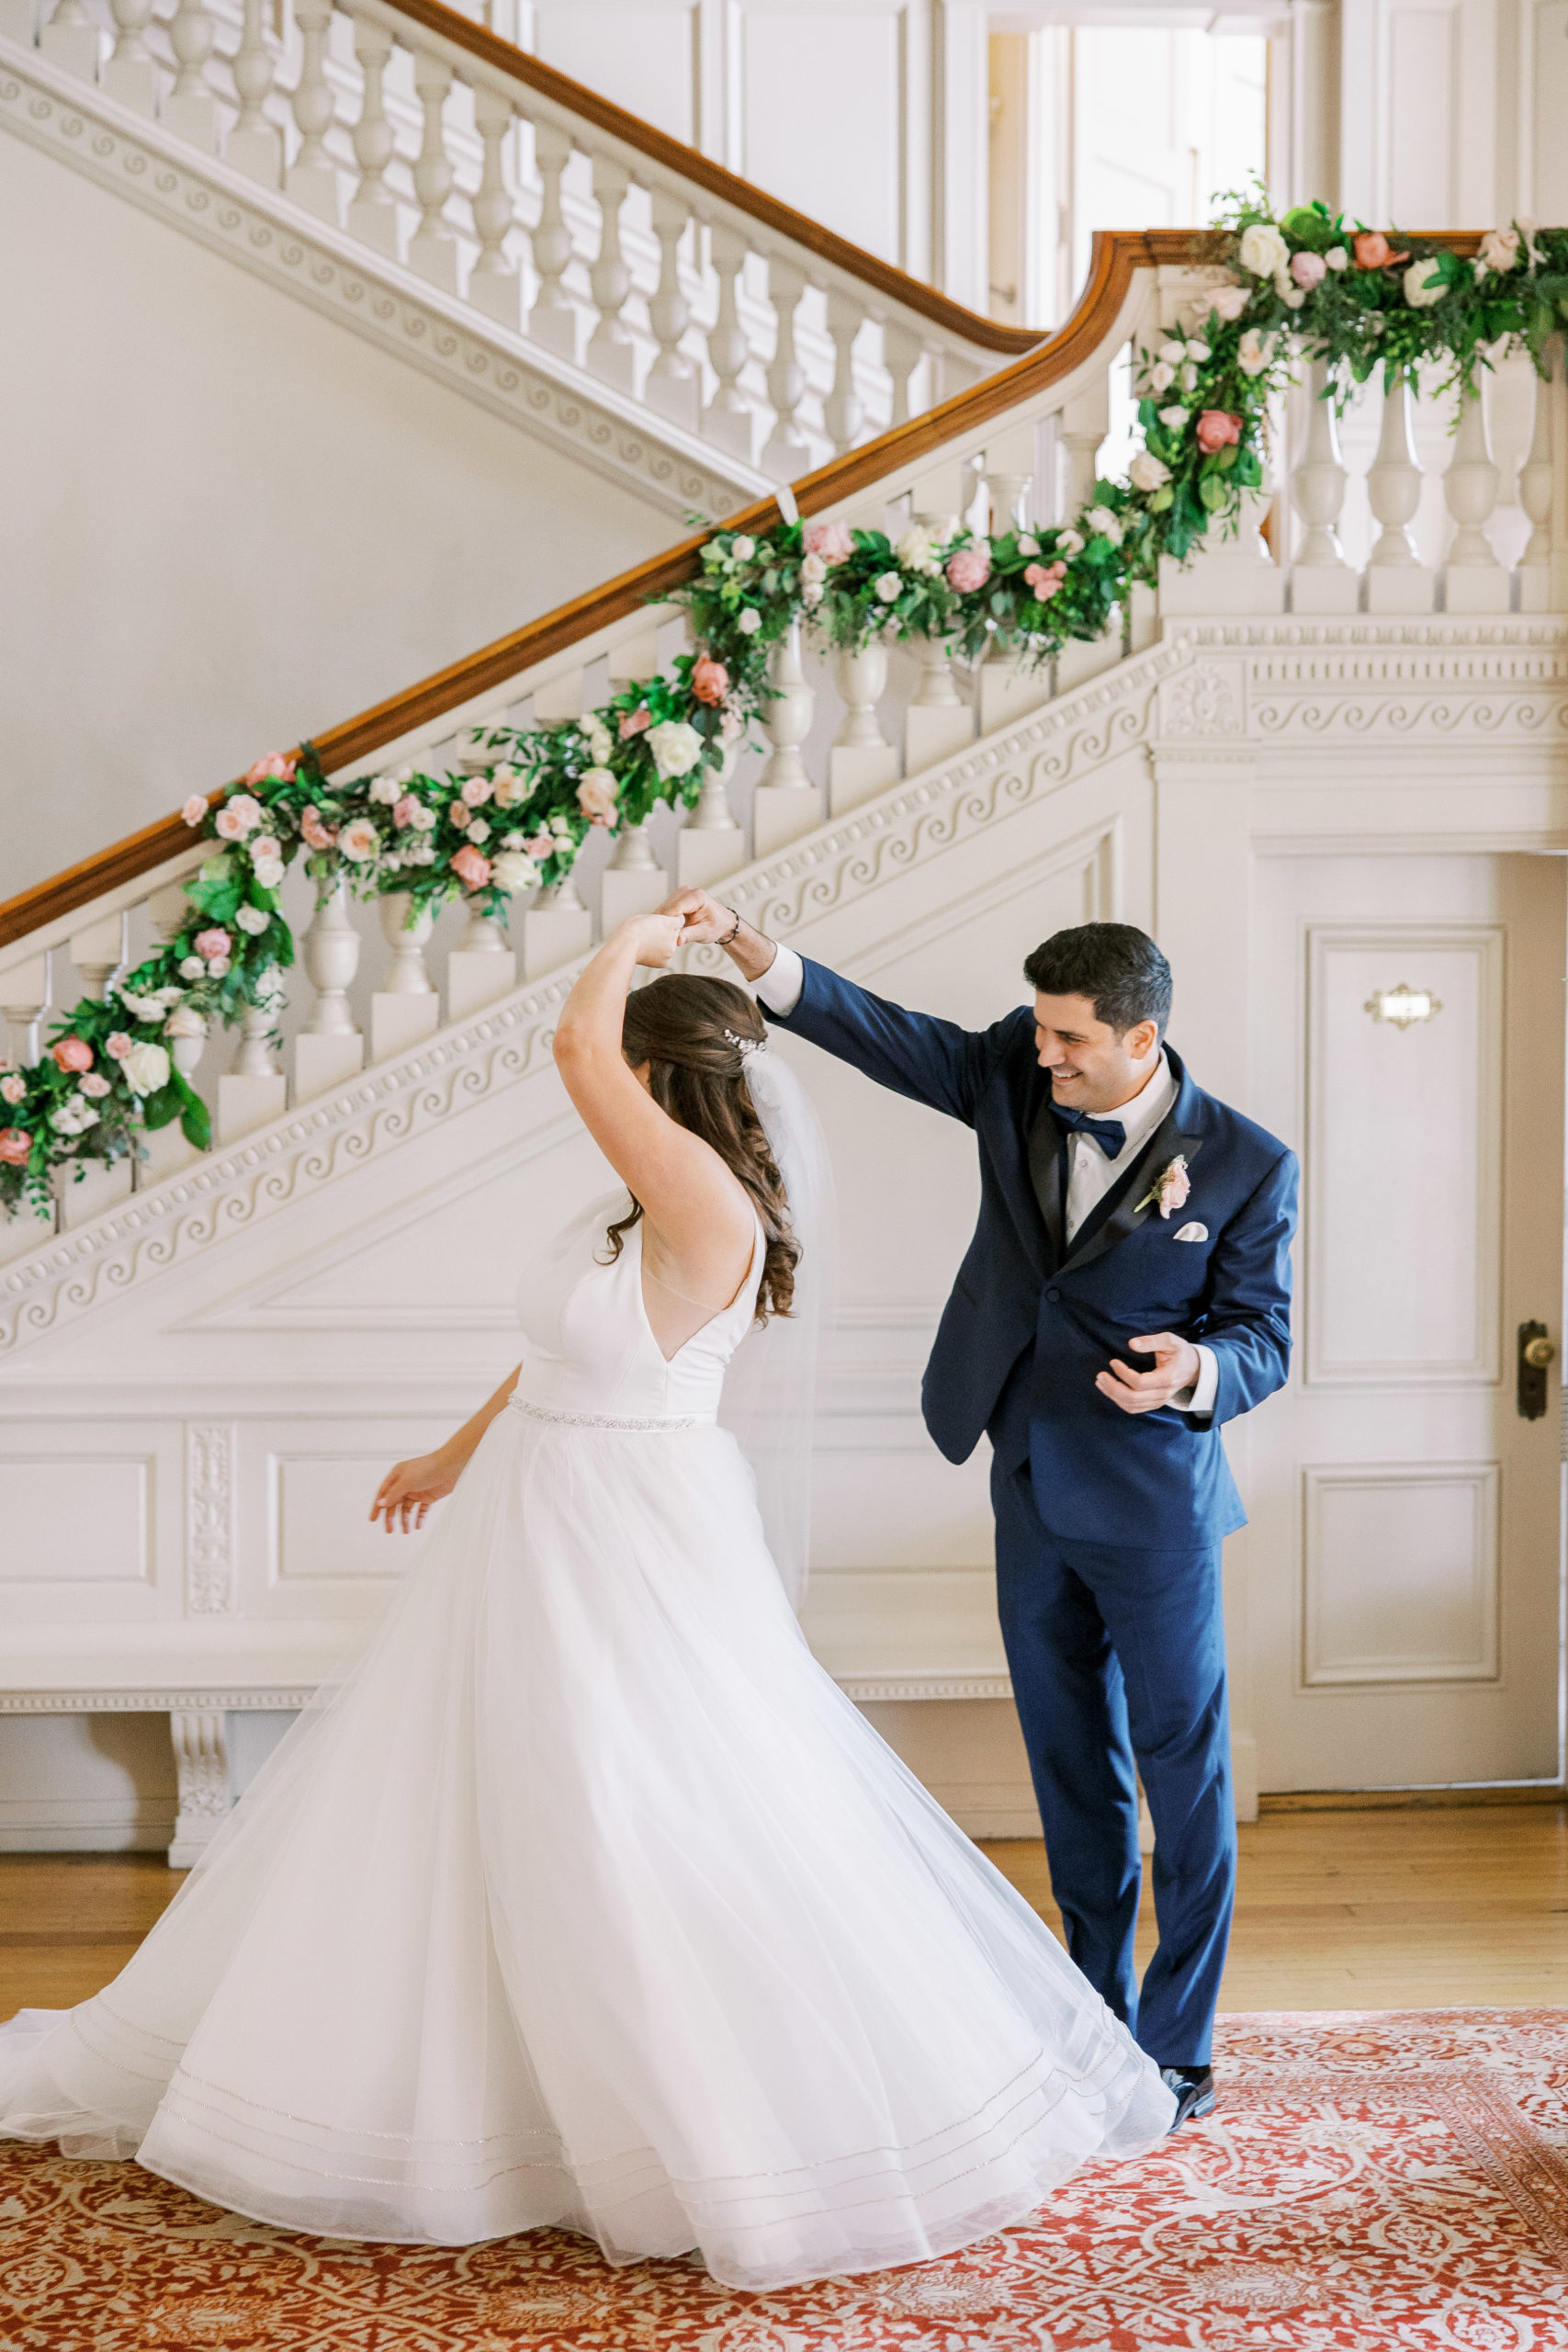 Groom spins bride around and smiles in great hall with grand staircase and rose garland 